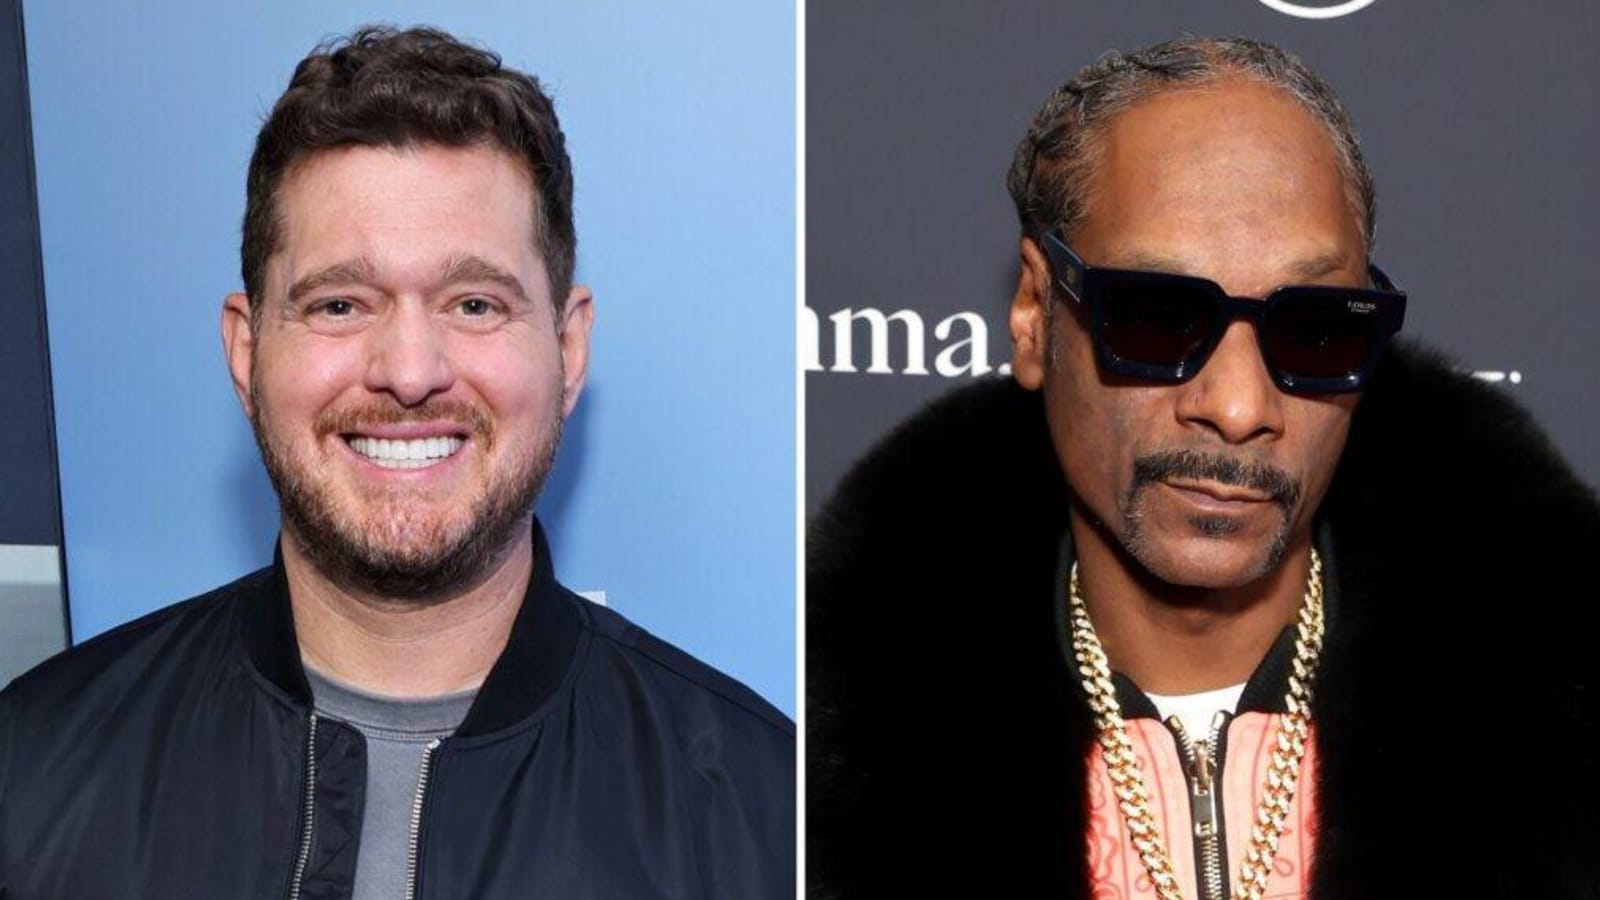 ‘The Voice’ Season 26 Adds Michael Bublé & Snoop Dogg as Coaches: Everything We Know So Far